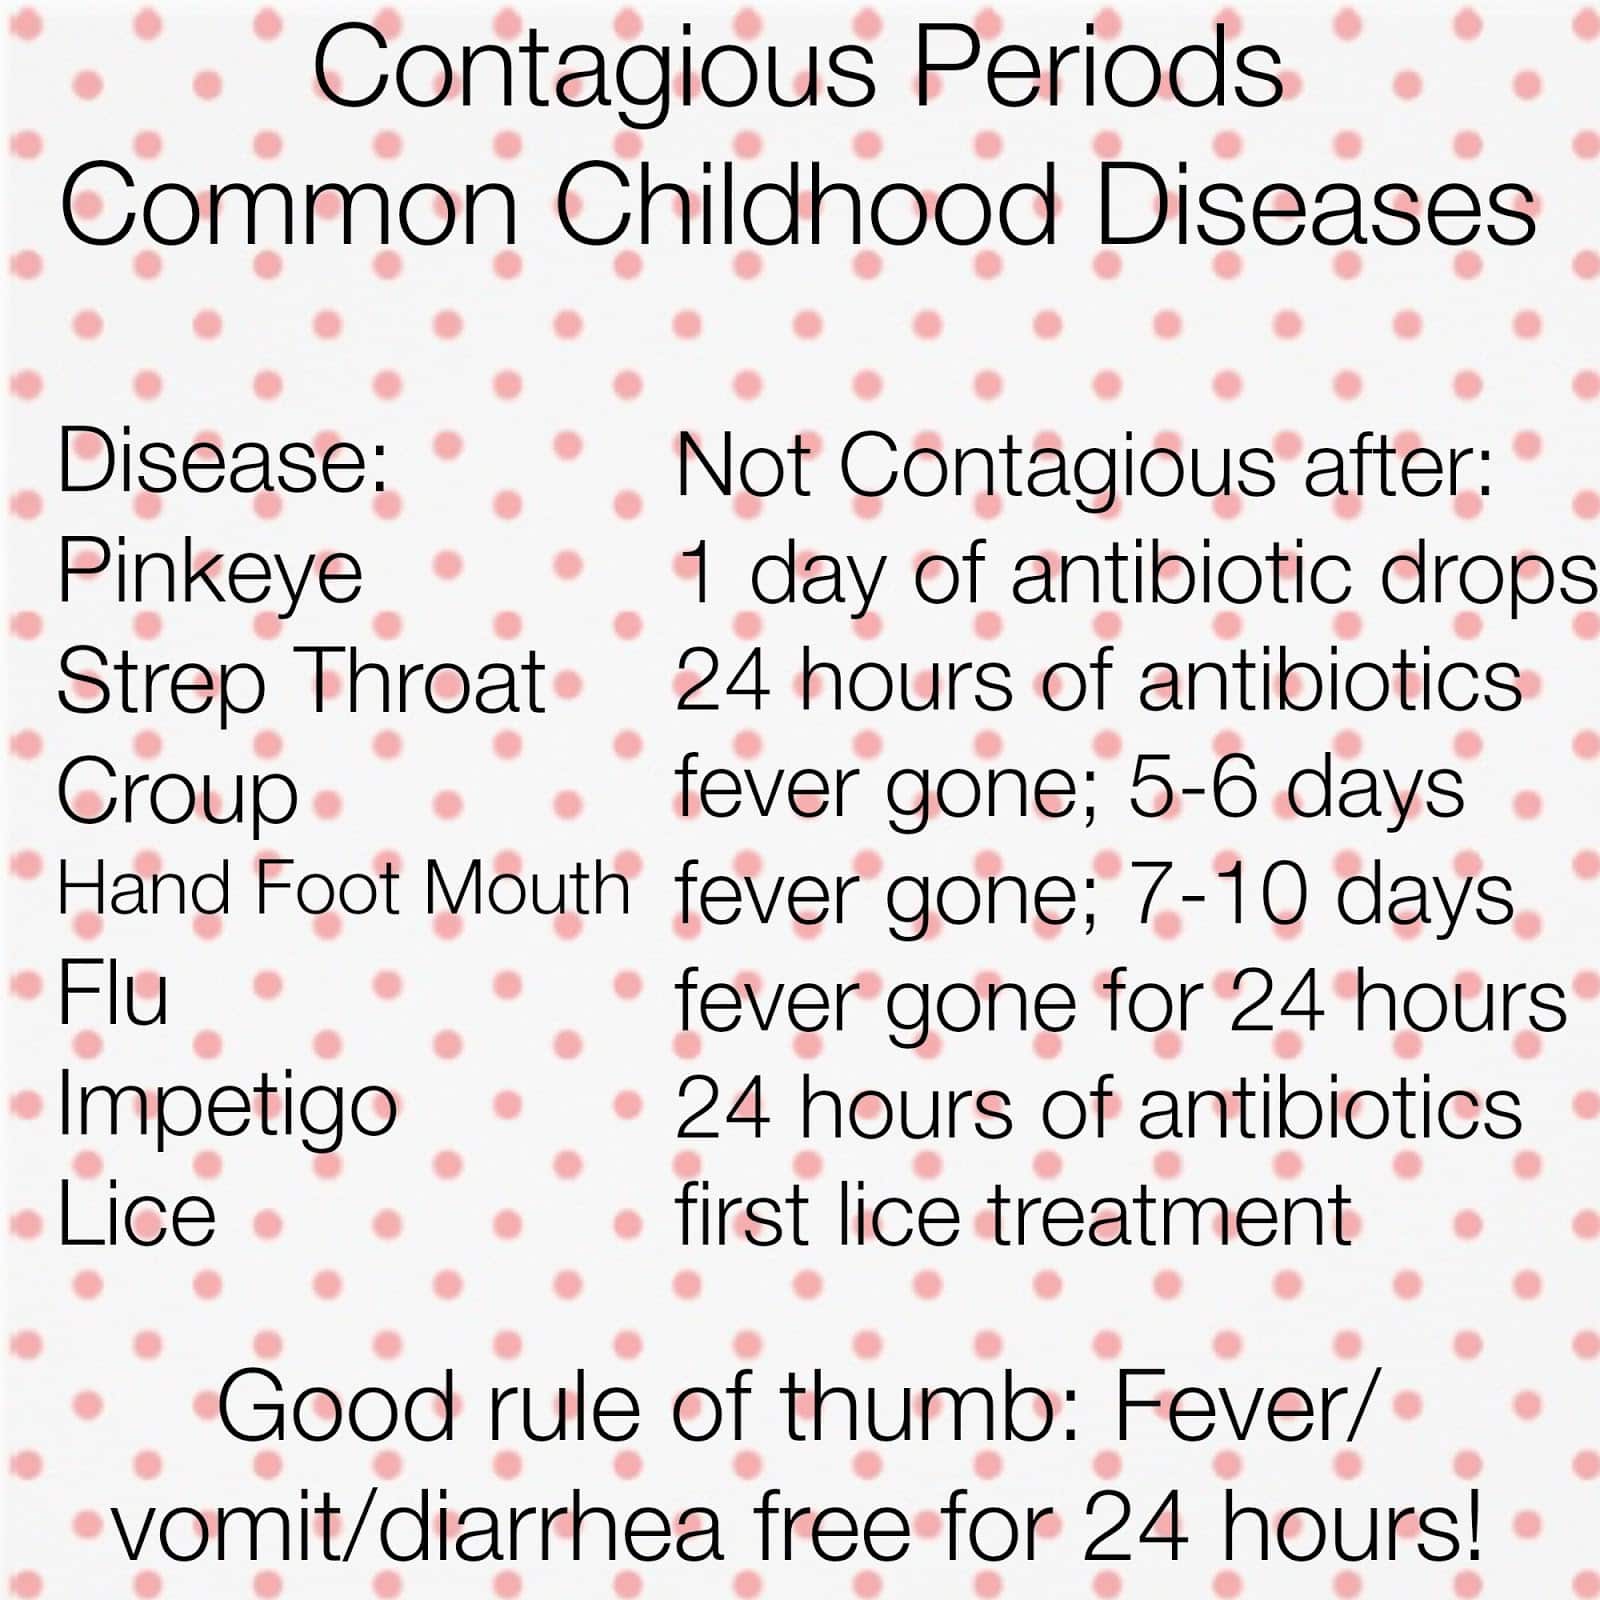 Contagious Periods for Common Childhood Diseases